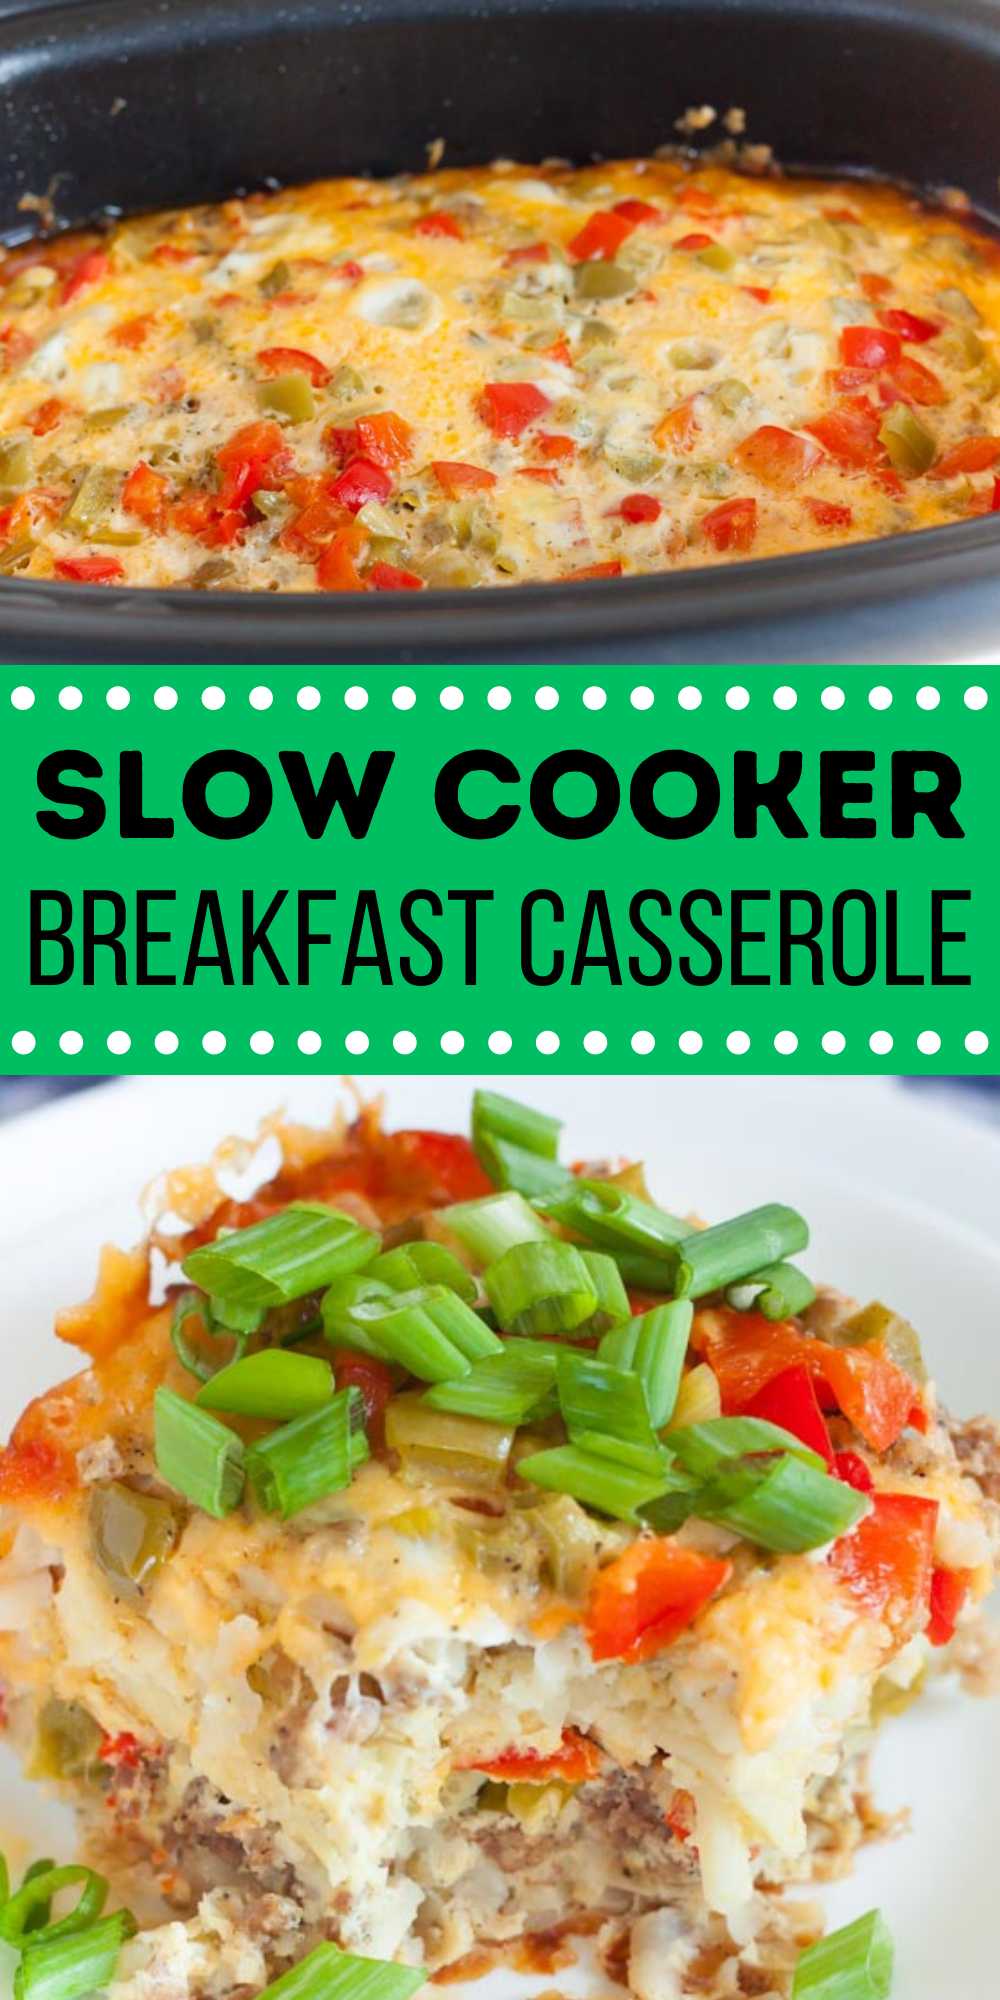 Try this easy CrockPot Breakfast Casserole Recipe for a easy breakfast idea. This is perfect for any day of the week. This breakfast recipe can be made in a variety of ways. You can change the veggies, cheese and meat to what you prefer. Add your favorite toppings and side dishes for a complete meal idea. #eatingonadime #crockpotbreakfastcasserole #breakfastcasserole